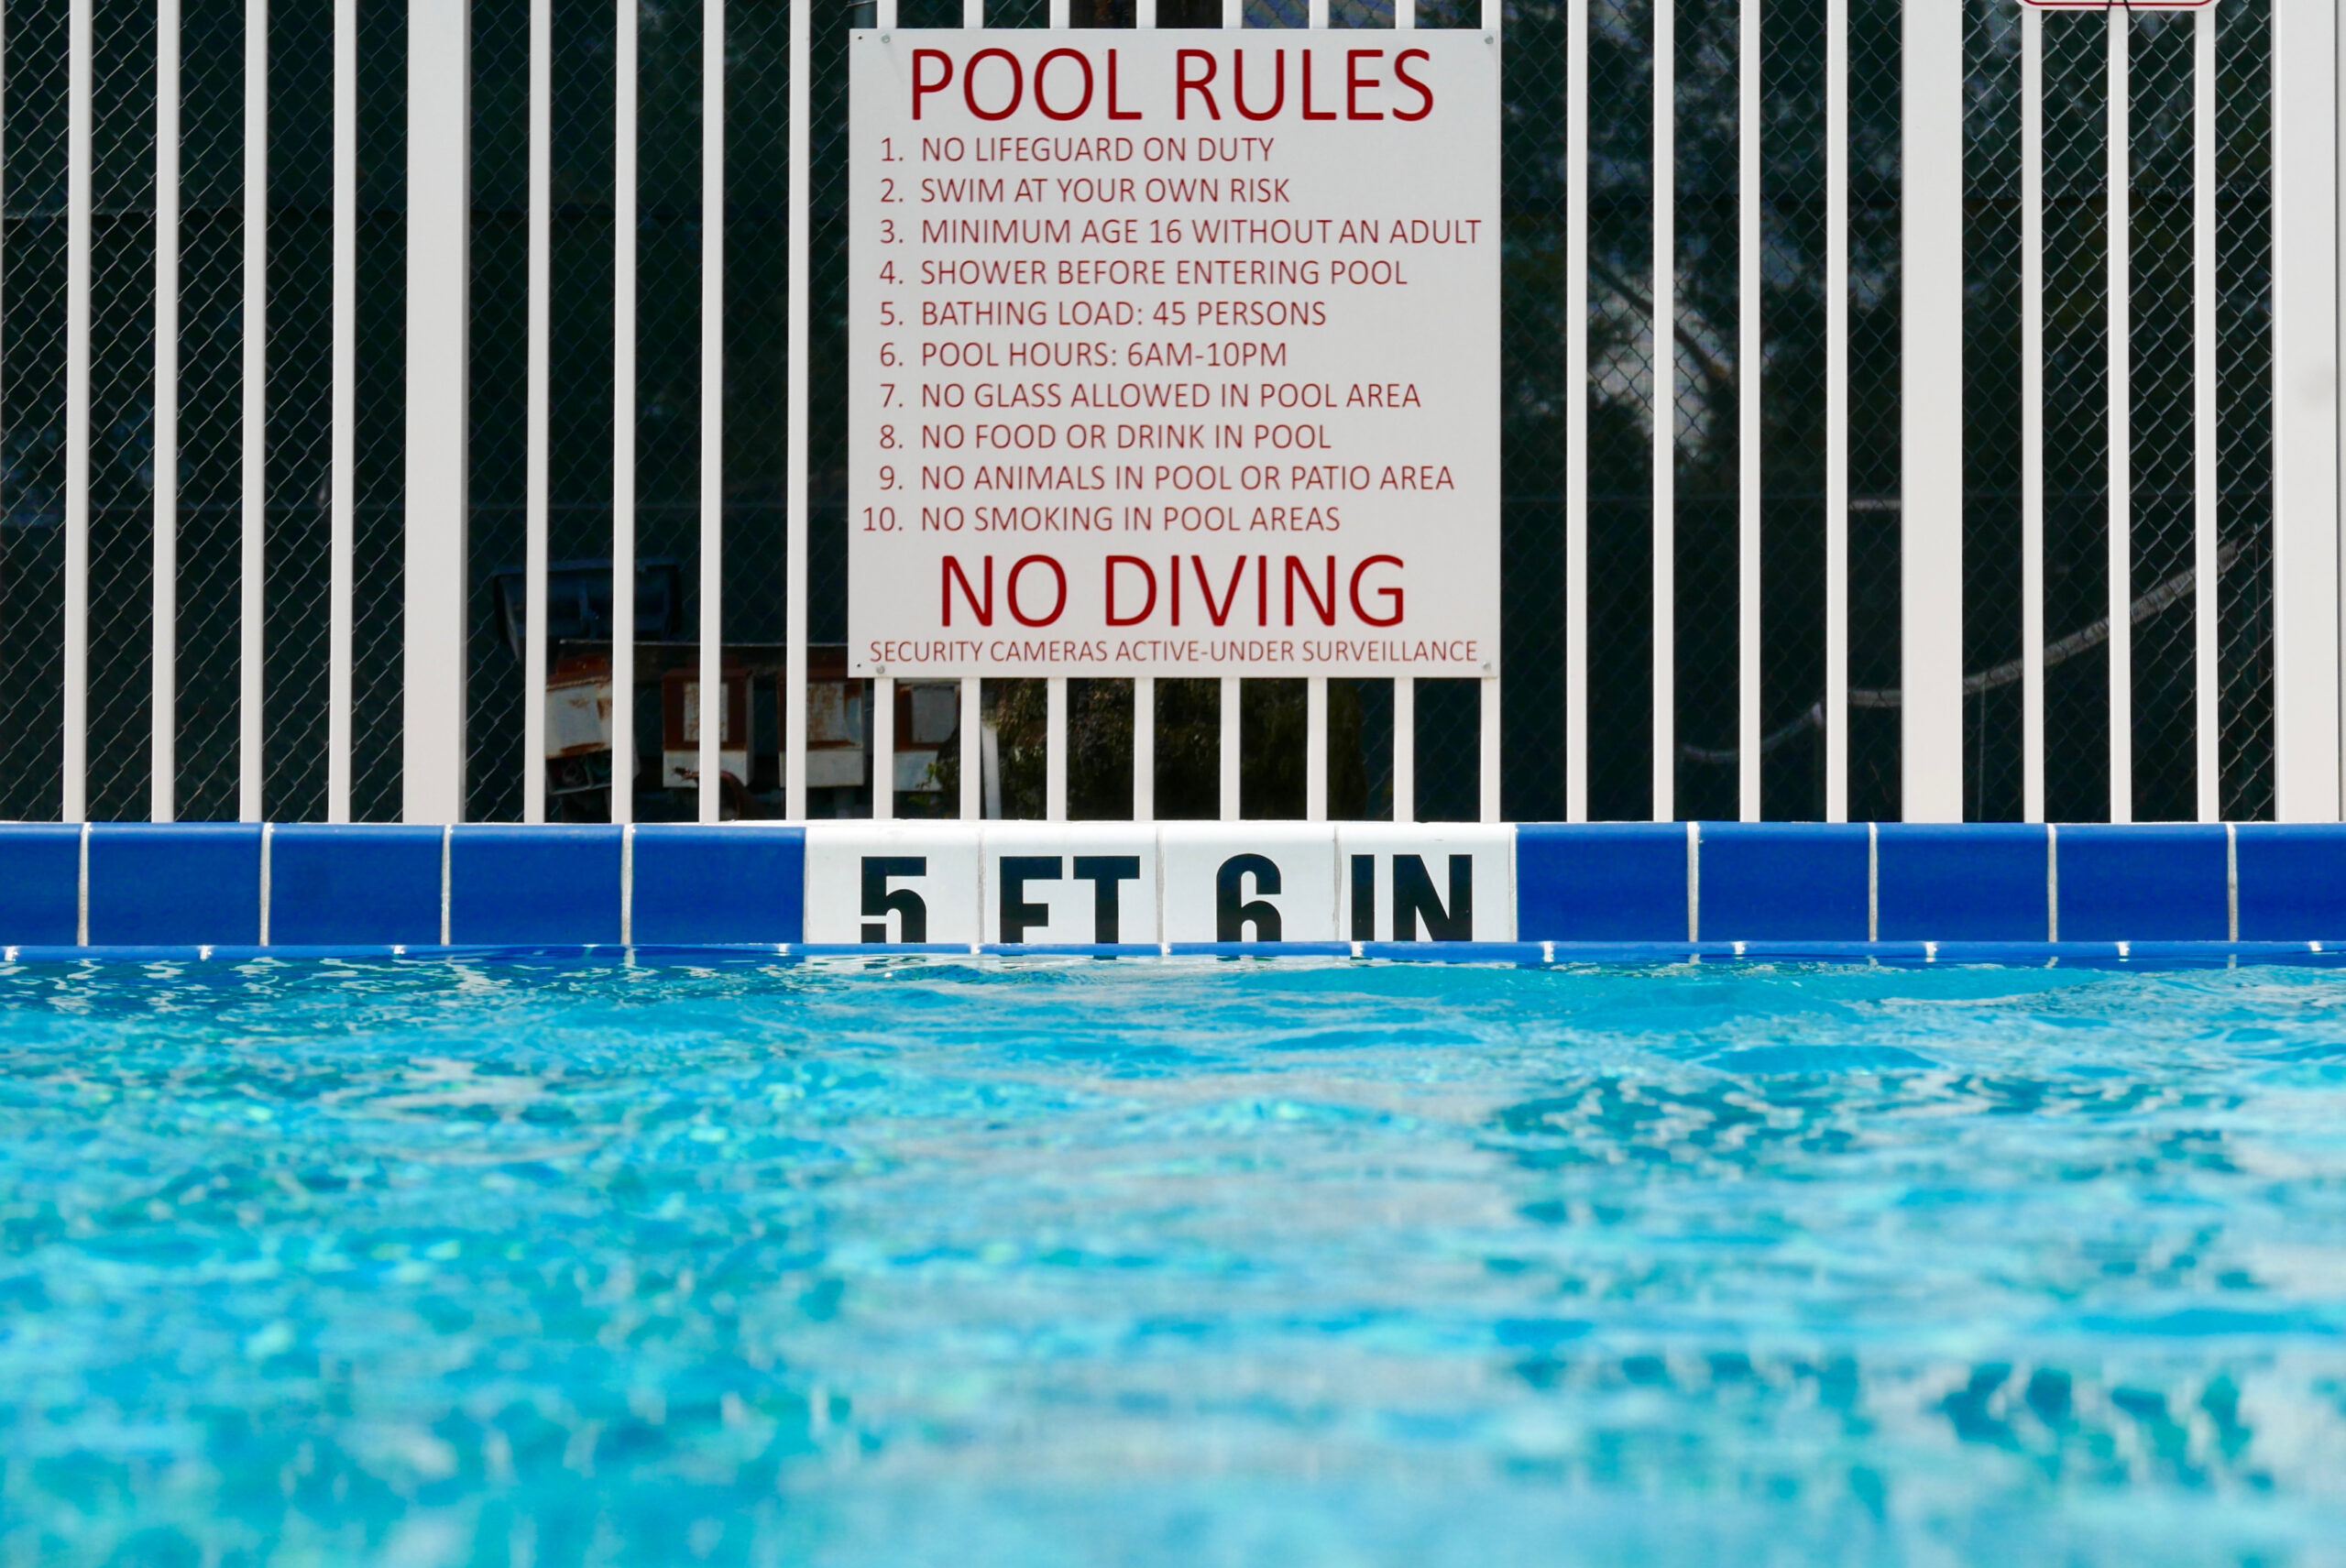 Pool rules sign at the deep end of a swimming pool